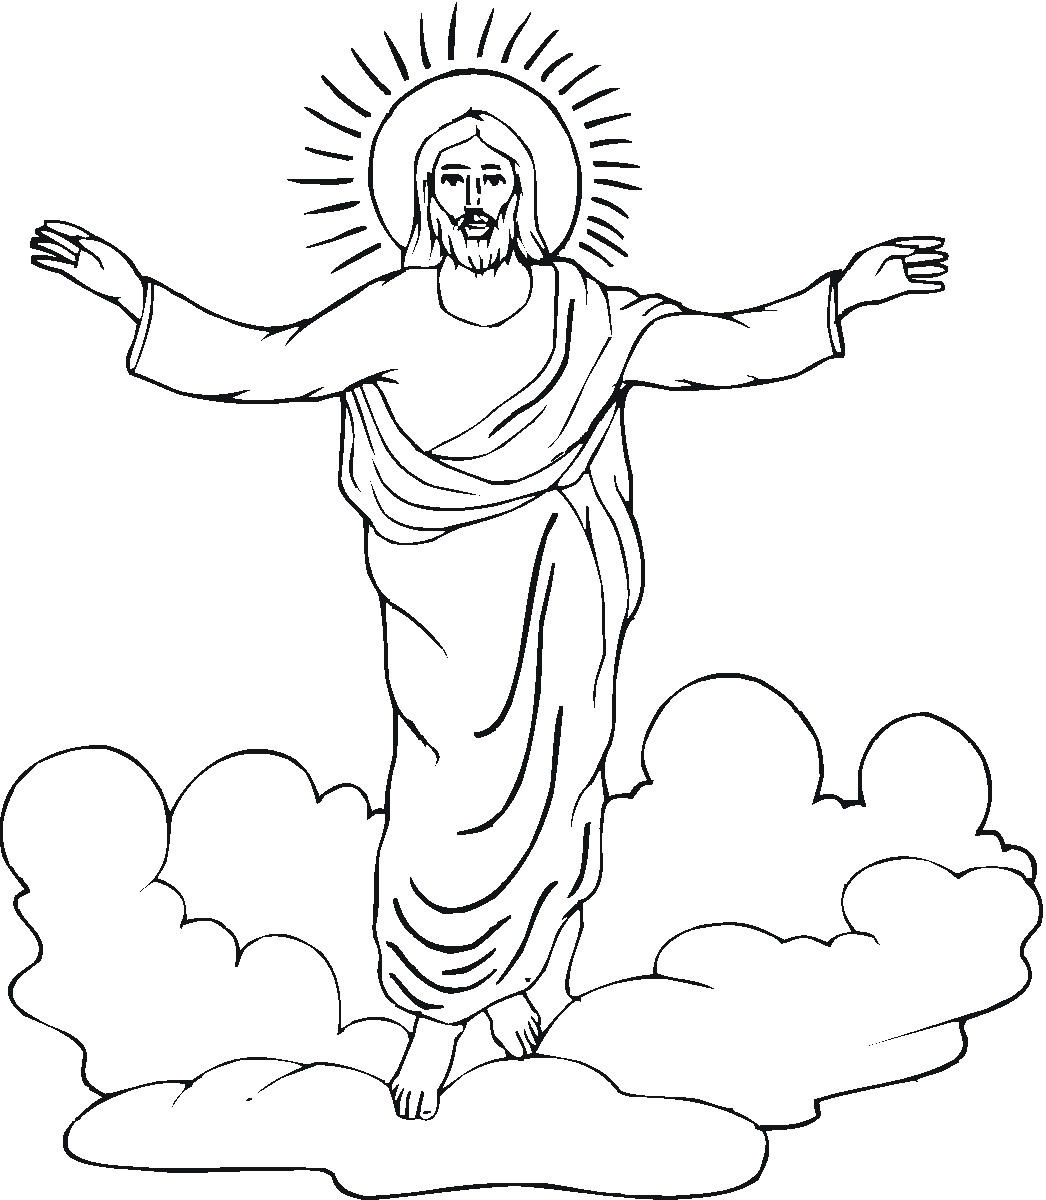 Download Coloring Page Easter Jesus - 190+ Best Free SVG File for Cricut, Silhouette and Other Machine